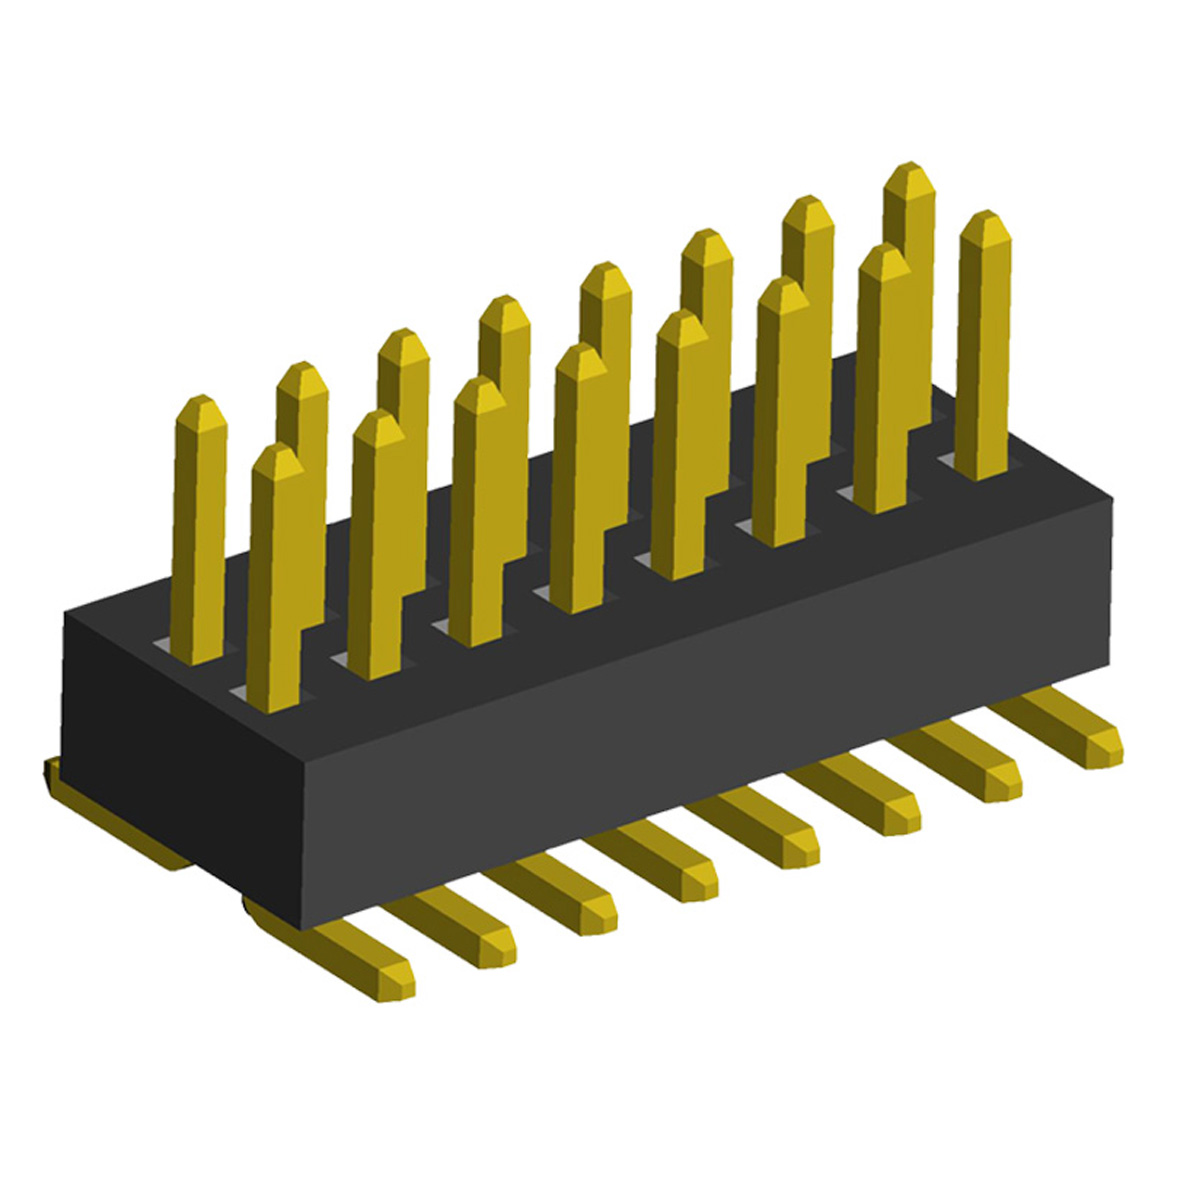 Open pin headers and Sockets for its, PCB/PCB (Board-to-Board) types with pitch 1,00x1,00 mm and sockets for them